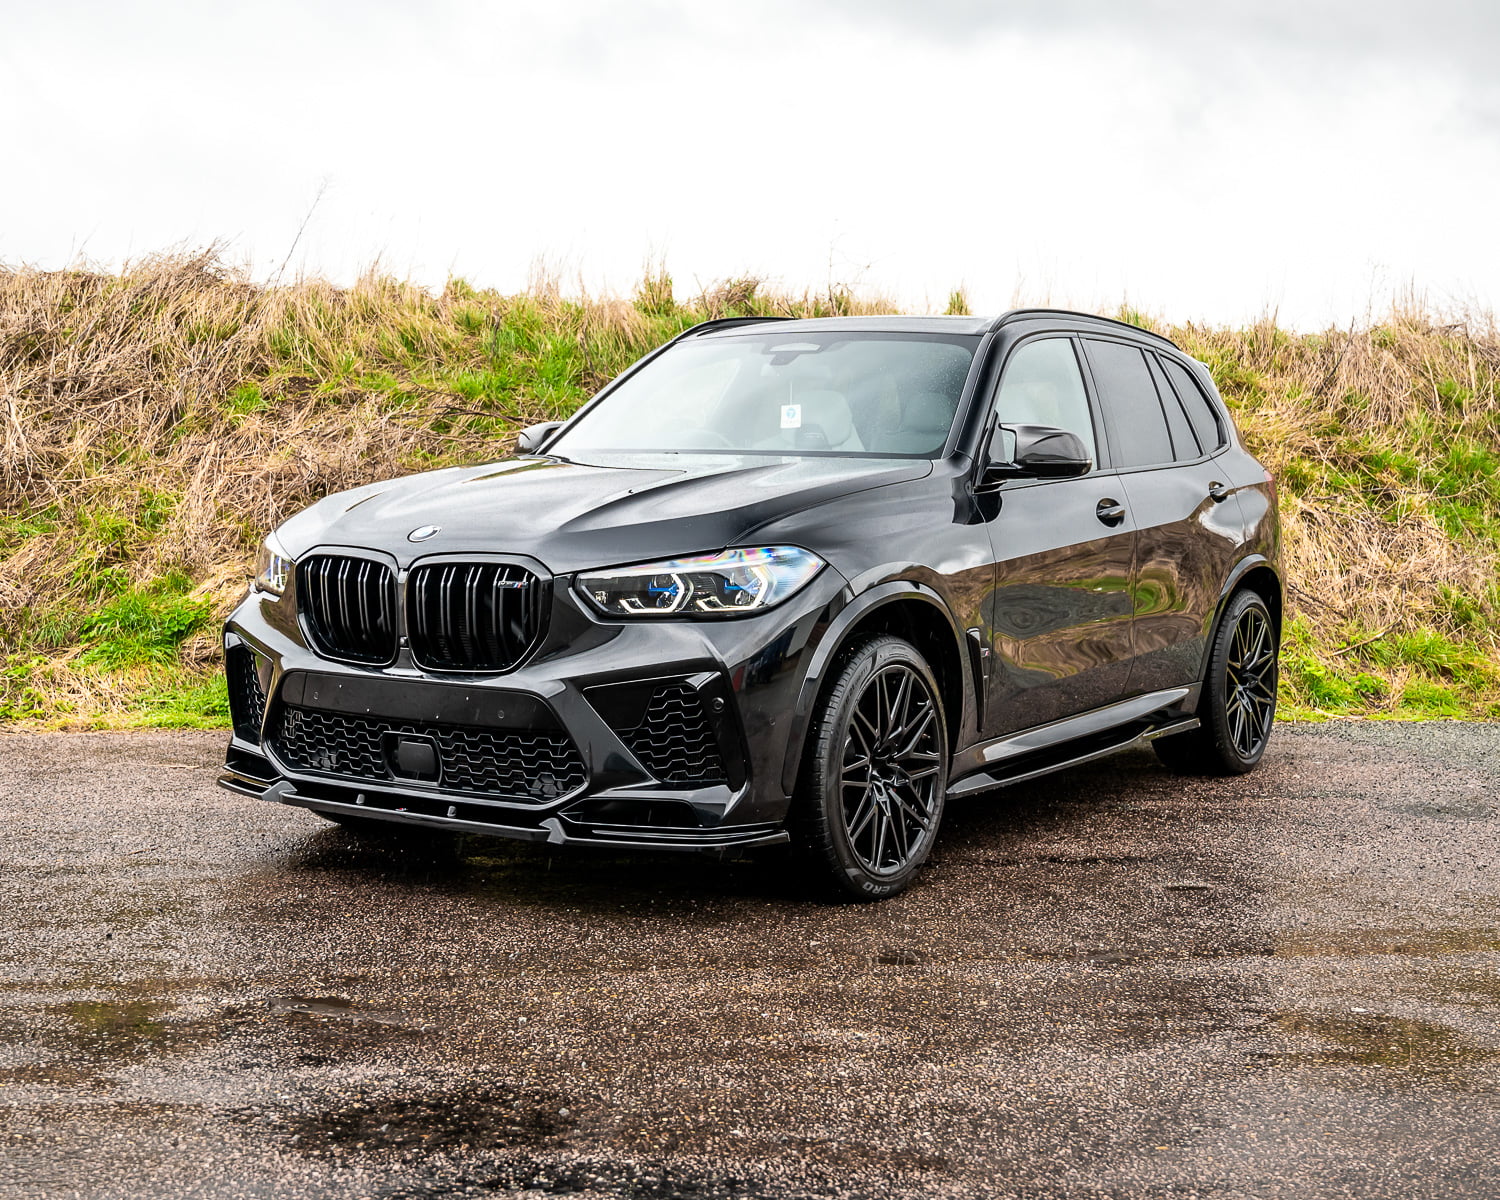 WIN THIS BMW X5M COMPETITION + £2,000 CASH